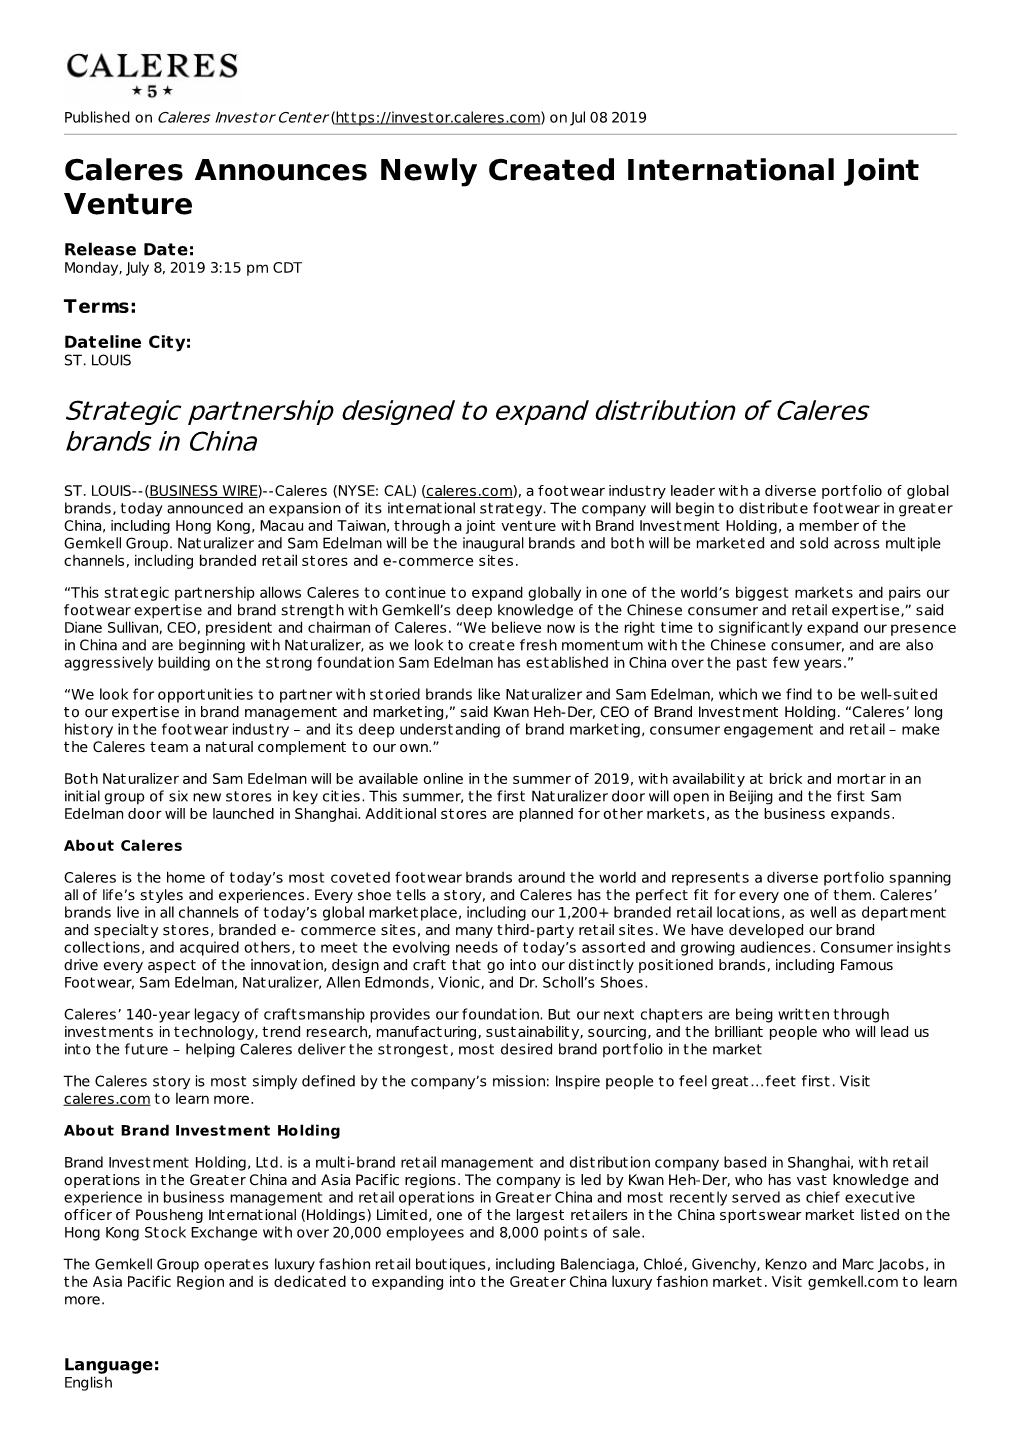 Caleres Announces Newly Created International Joint Venture